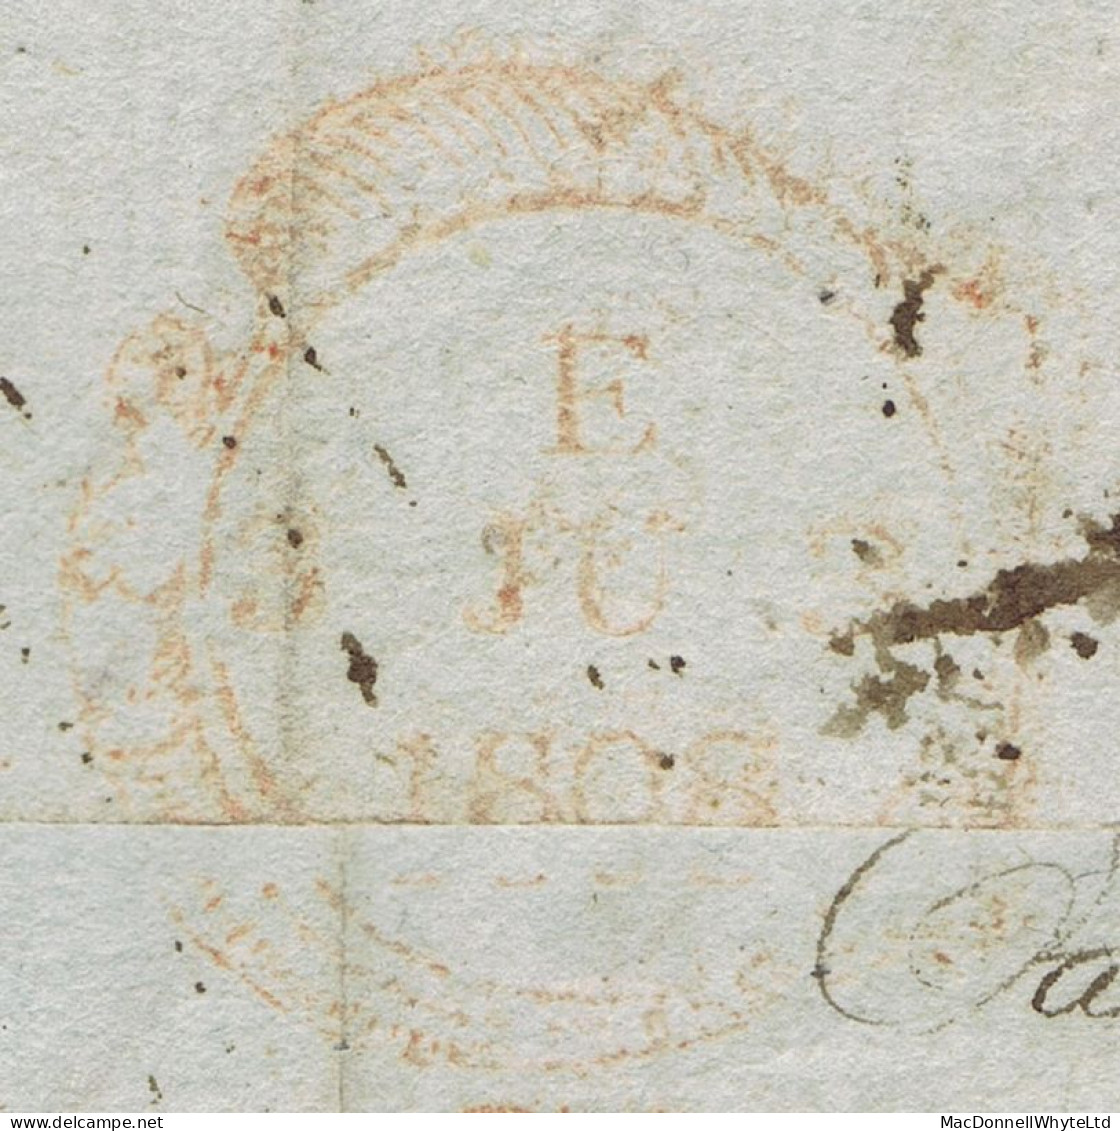 Ireland Galway 1808 Letter To Scotland With Linear GALWAY And Orange Dublin "Mermaid" F/3 JU 3/1808, Rated 2/1d - Prephilately